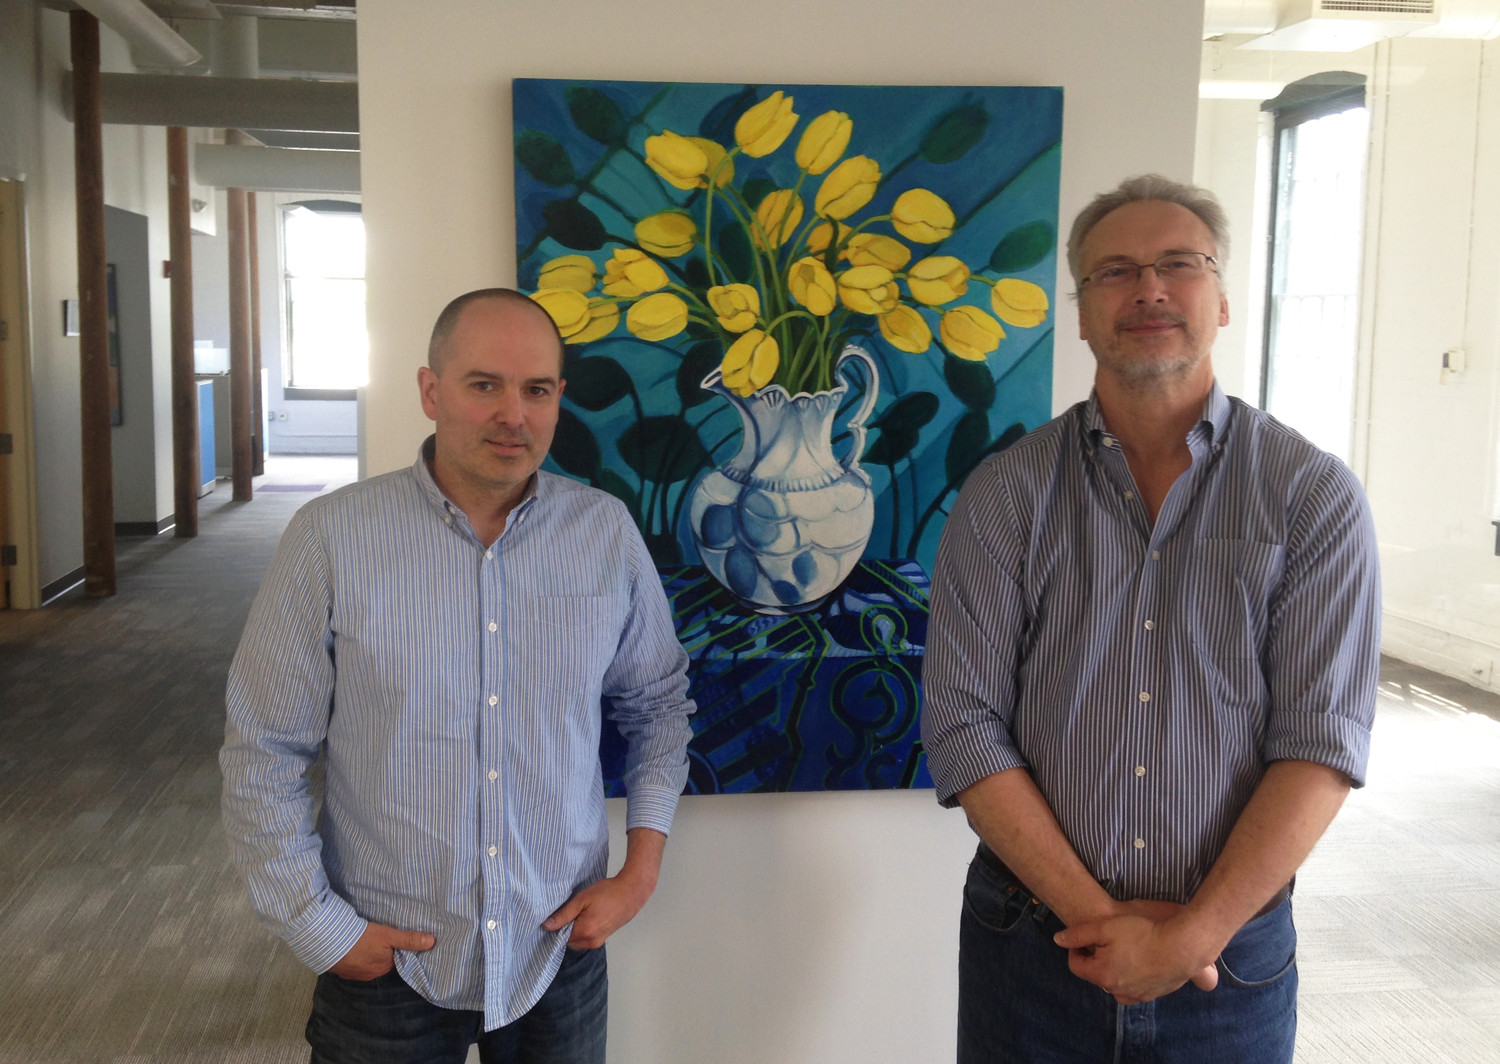 Clifford Grimm, left, and William Martin, of EpiVax, at the new office location in Olneyville.